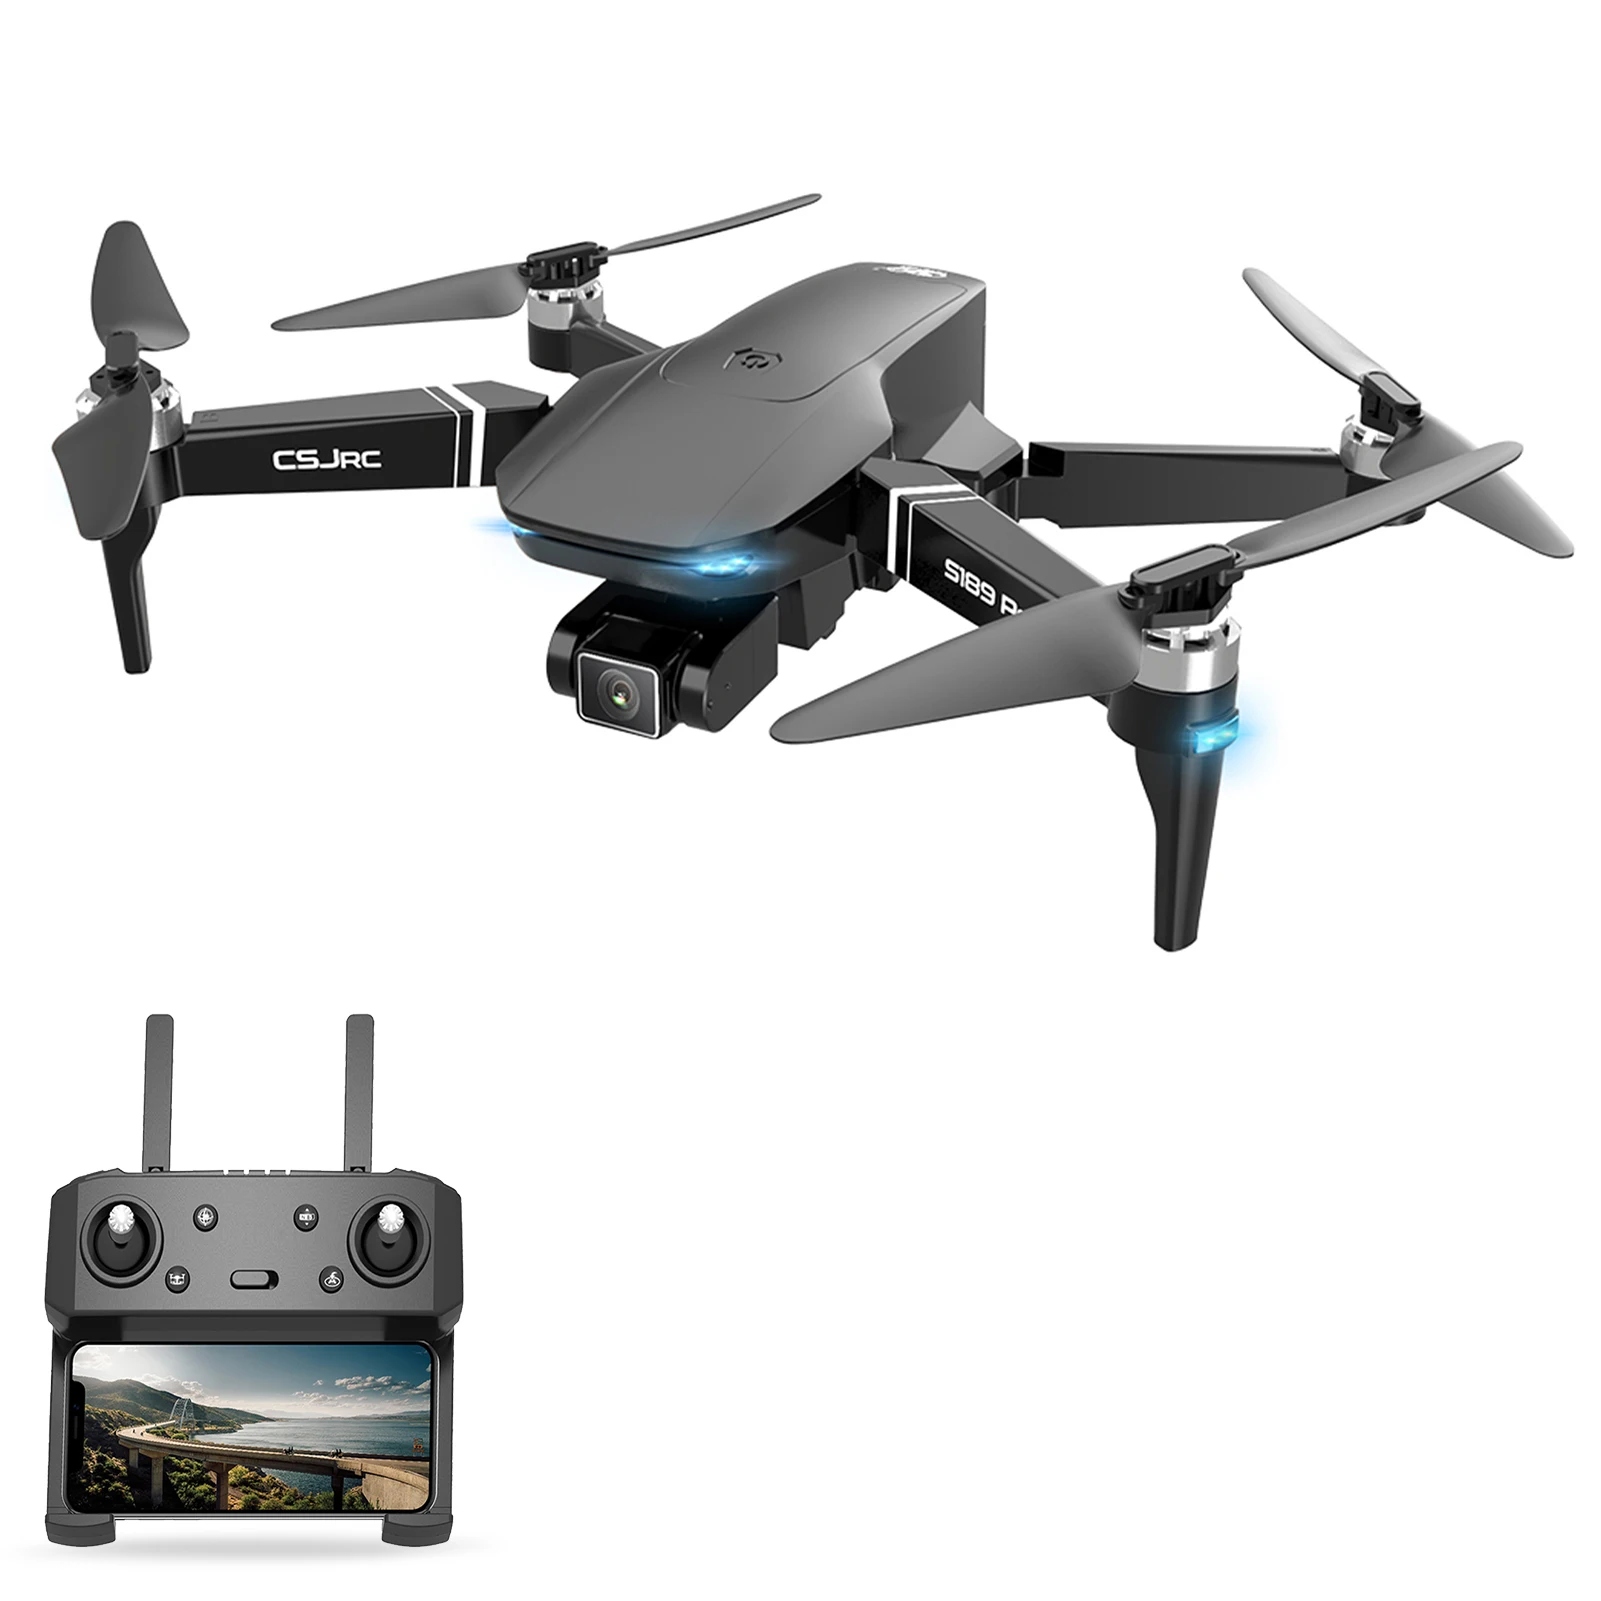 

S189 PRO GPS Drone with 4K Camera Brushless Quadcopter 5G Wifi FPV Follow Surround Fly 25mins Flight Time Dual Camera Drone, Black